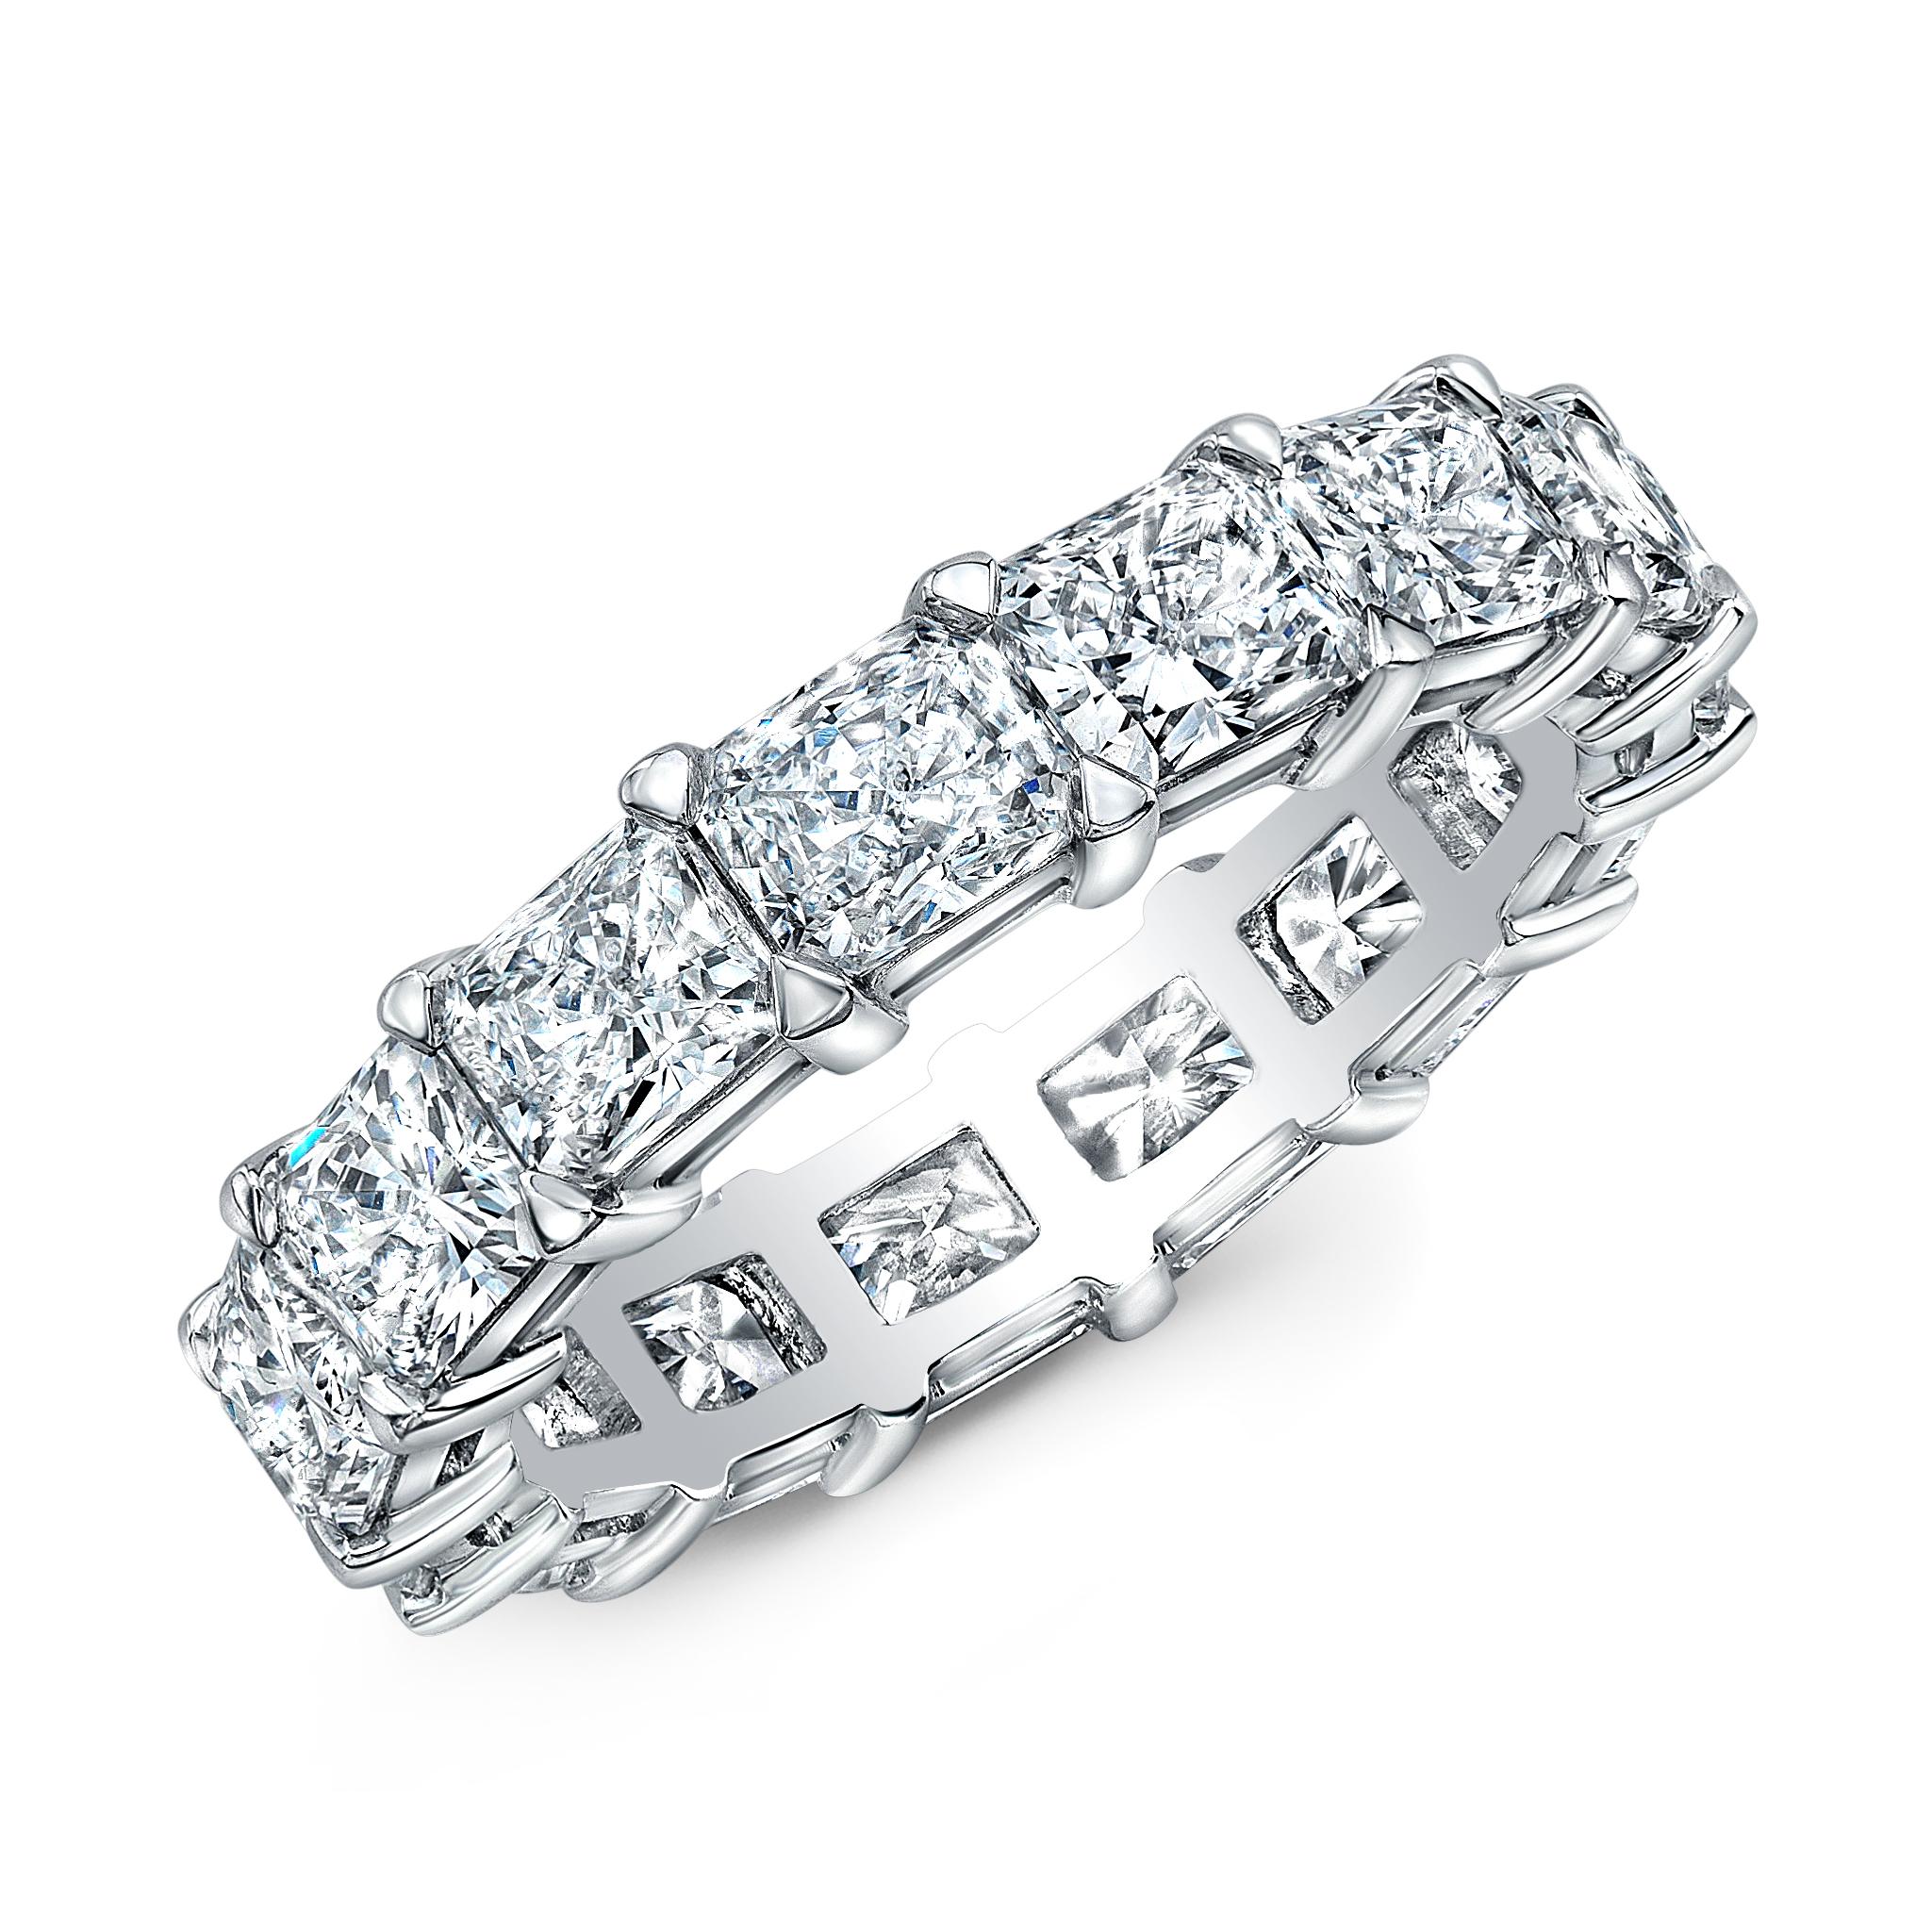 15 Radiant Cut Diamonds in an East-West setting eternity band.
18k white gold
5.05 carats total weight 
Ring size 6.5
Approximate Color F Clarity VS
